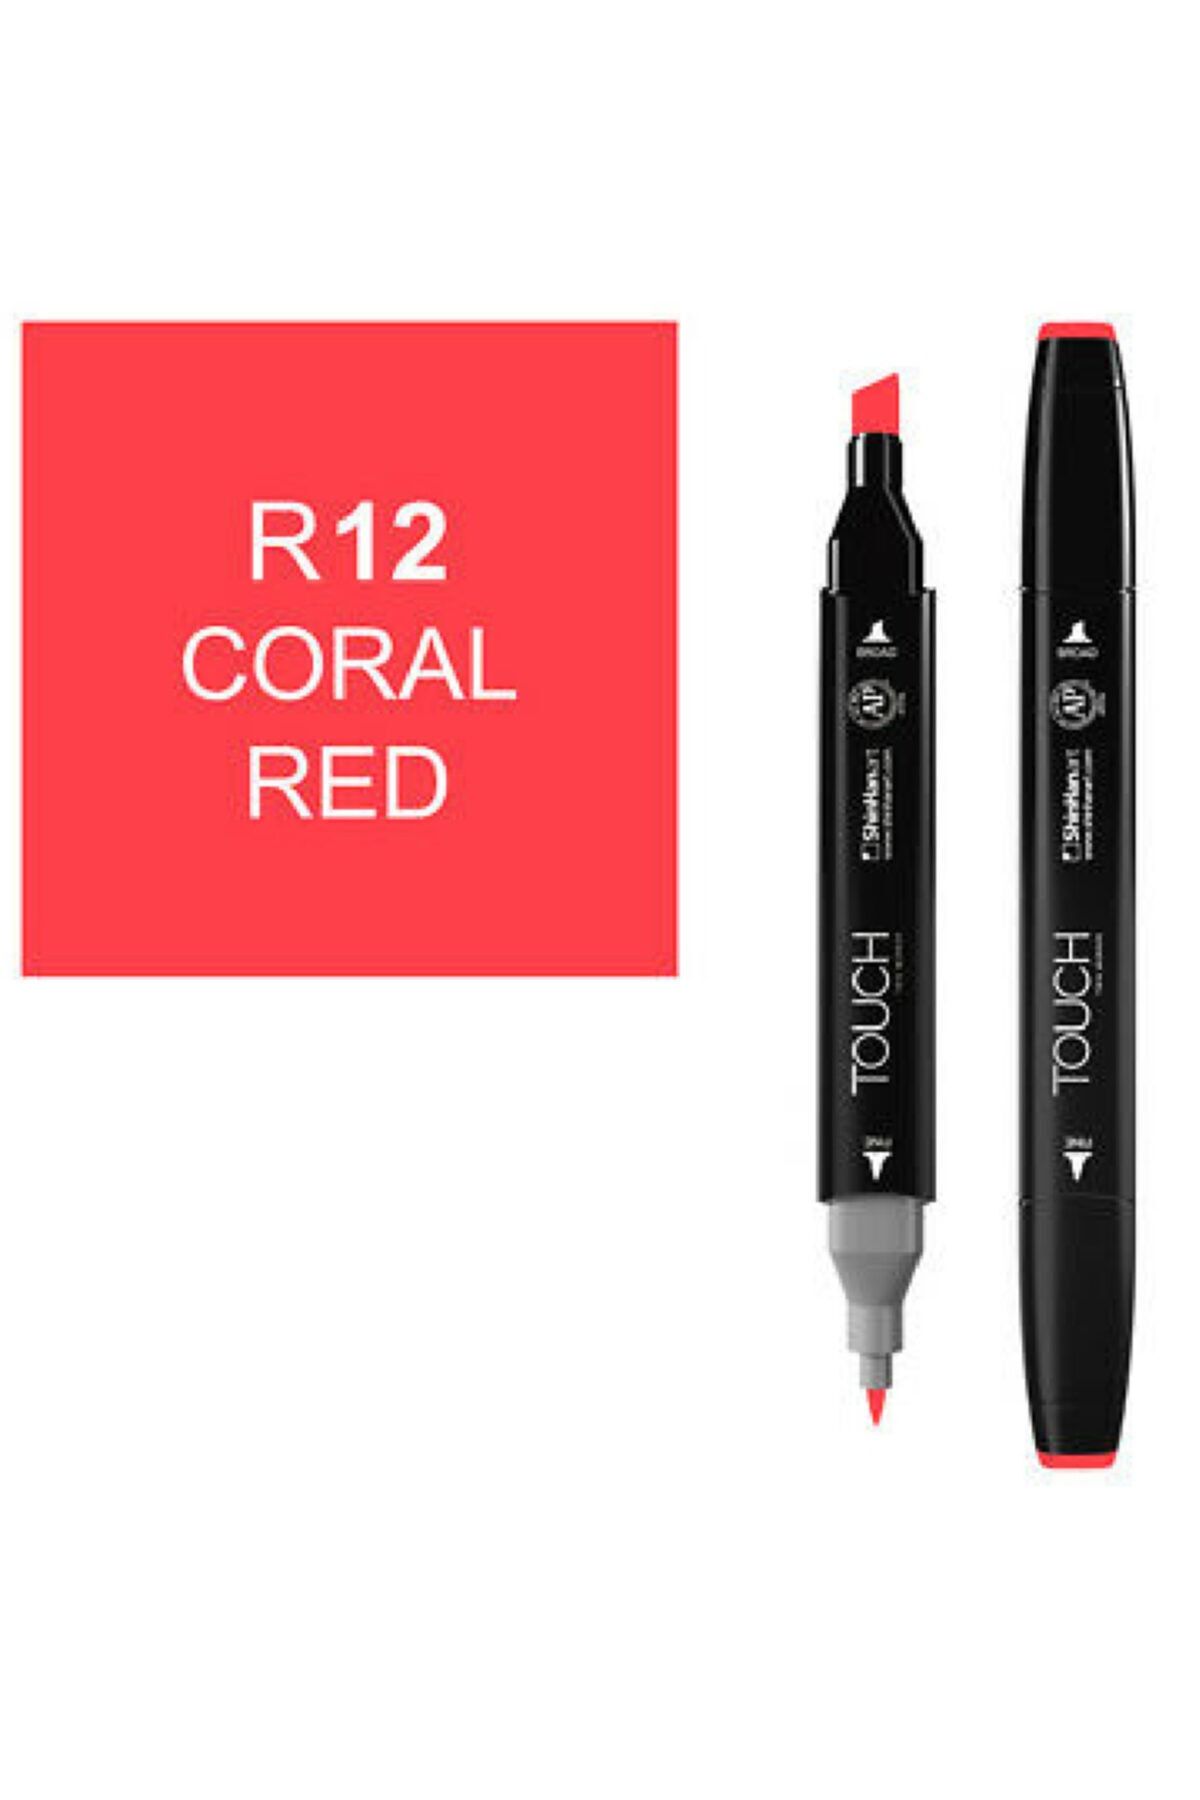 Ponart Touch Twin R12 Coral Red Marker Sh1110012